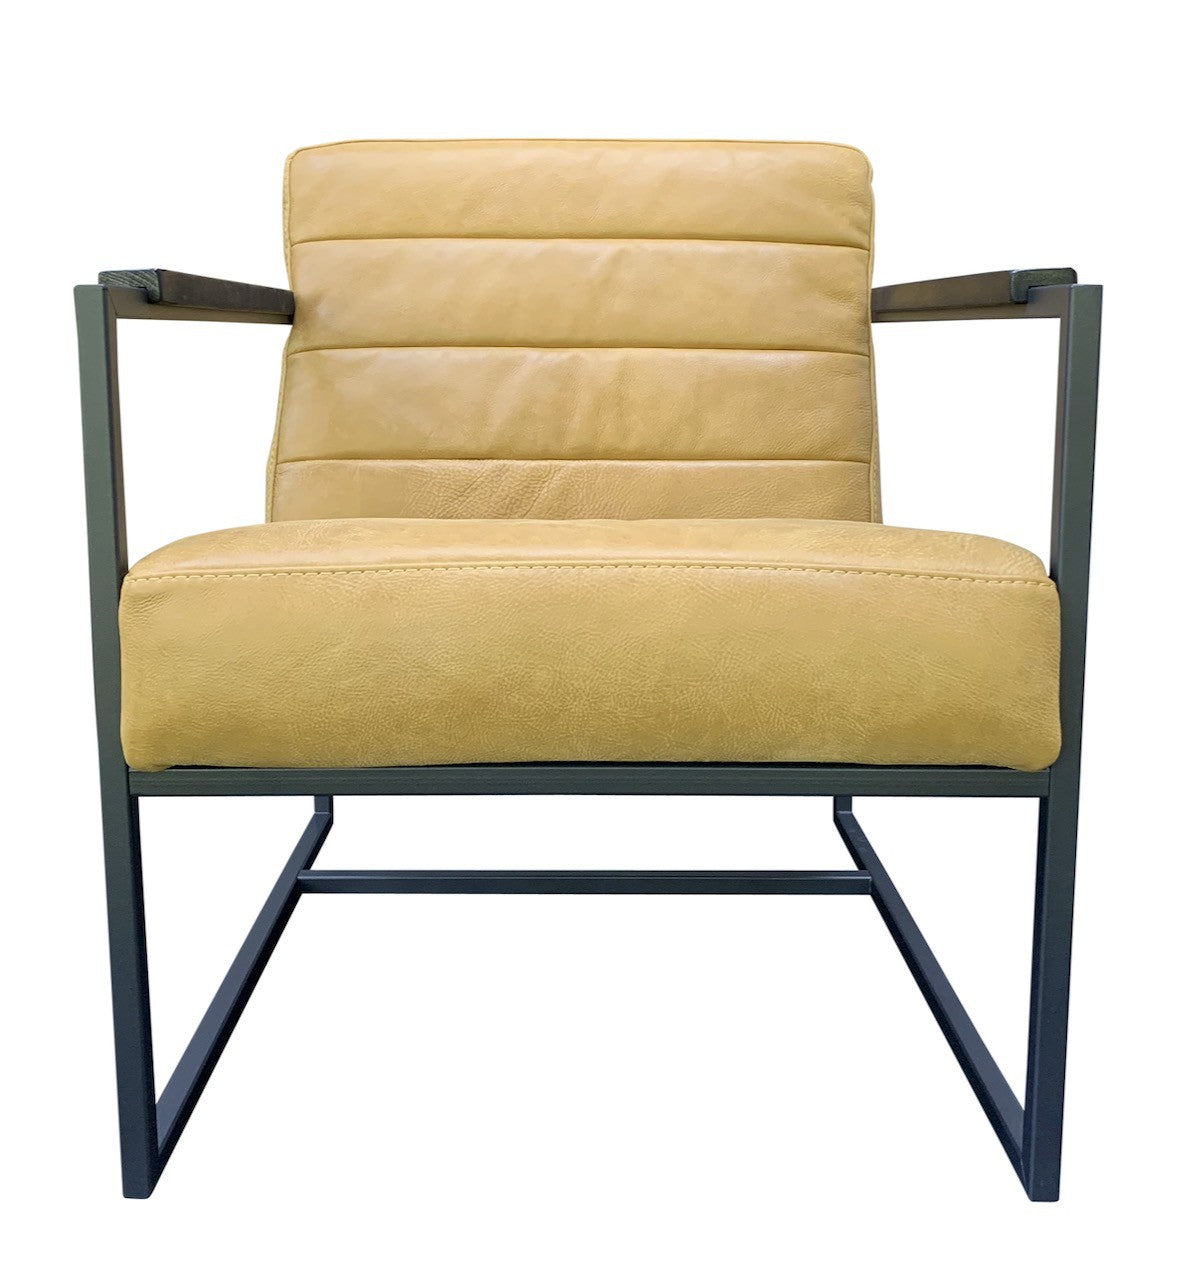 Chair Edgar thick leather Mustard